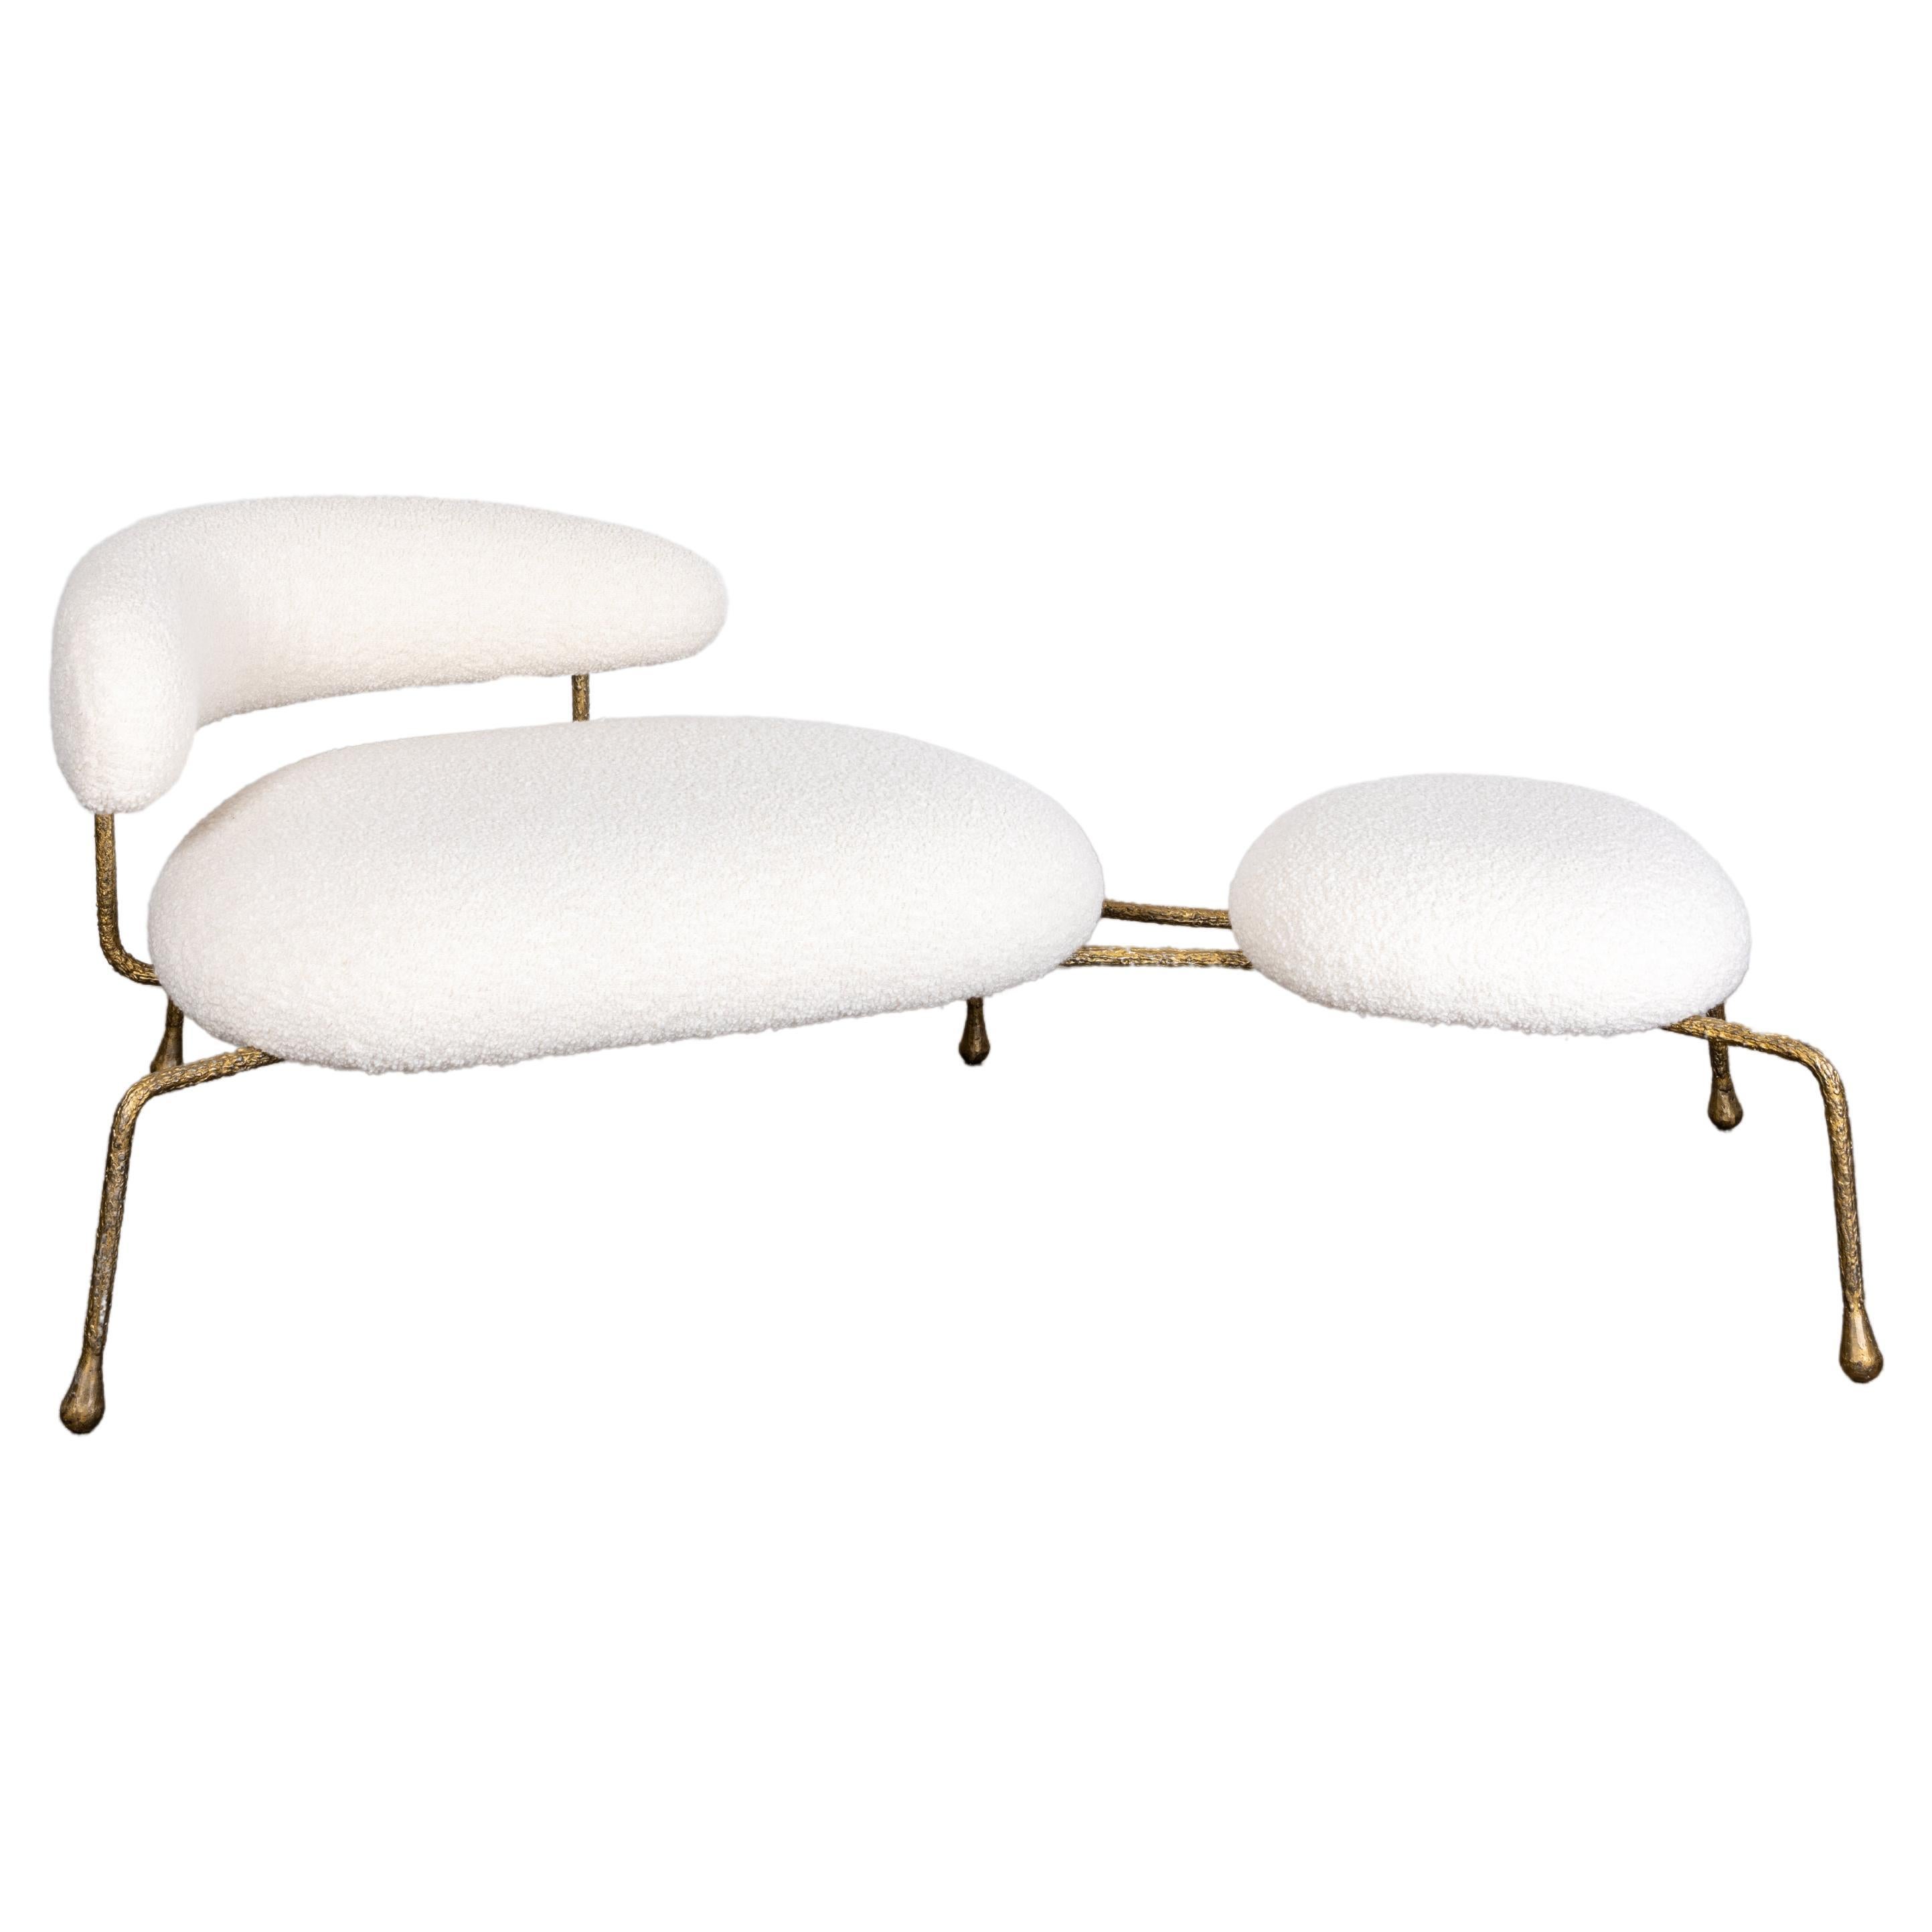 Orbito - Chaise Lounge For Sale